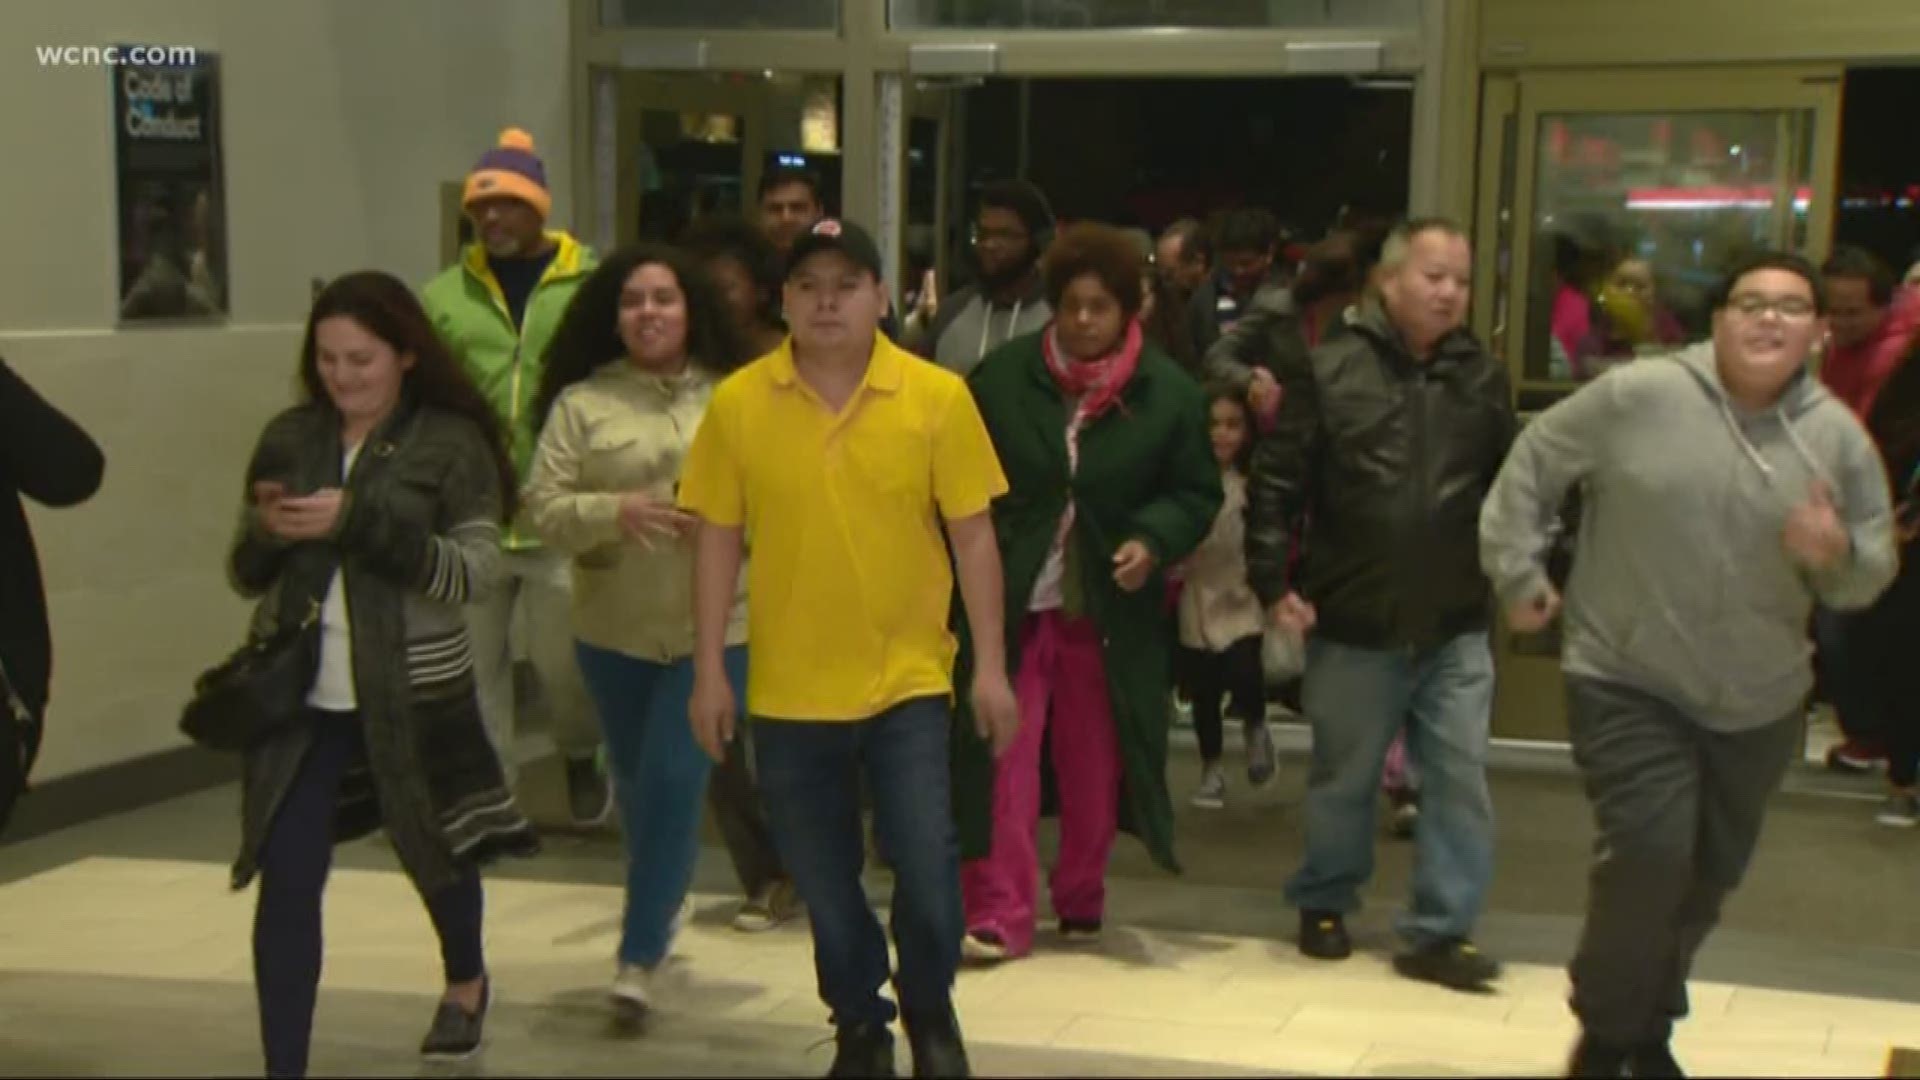 Two minutes before 6 p.m., the doors burst open at Concord Mills.